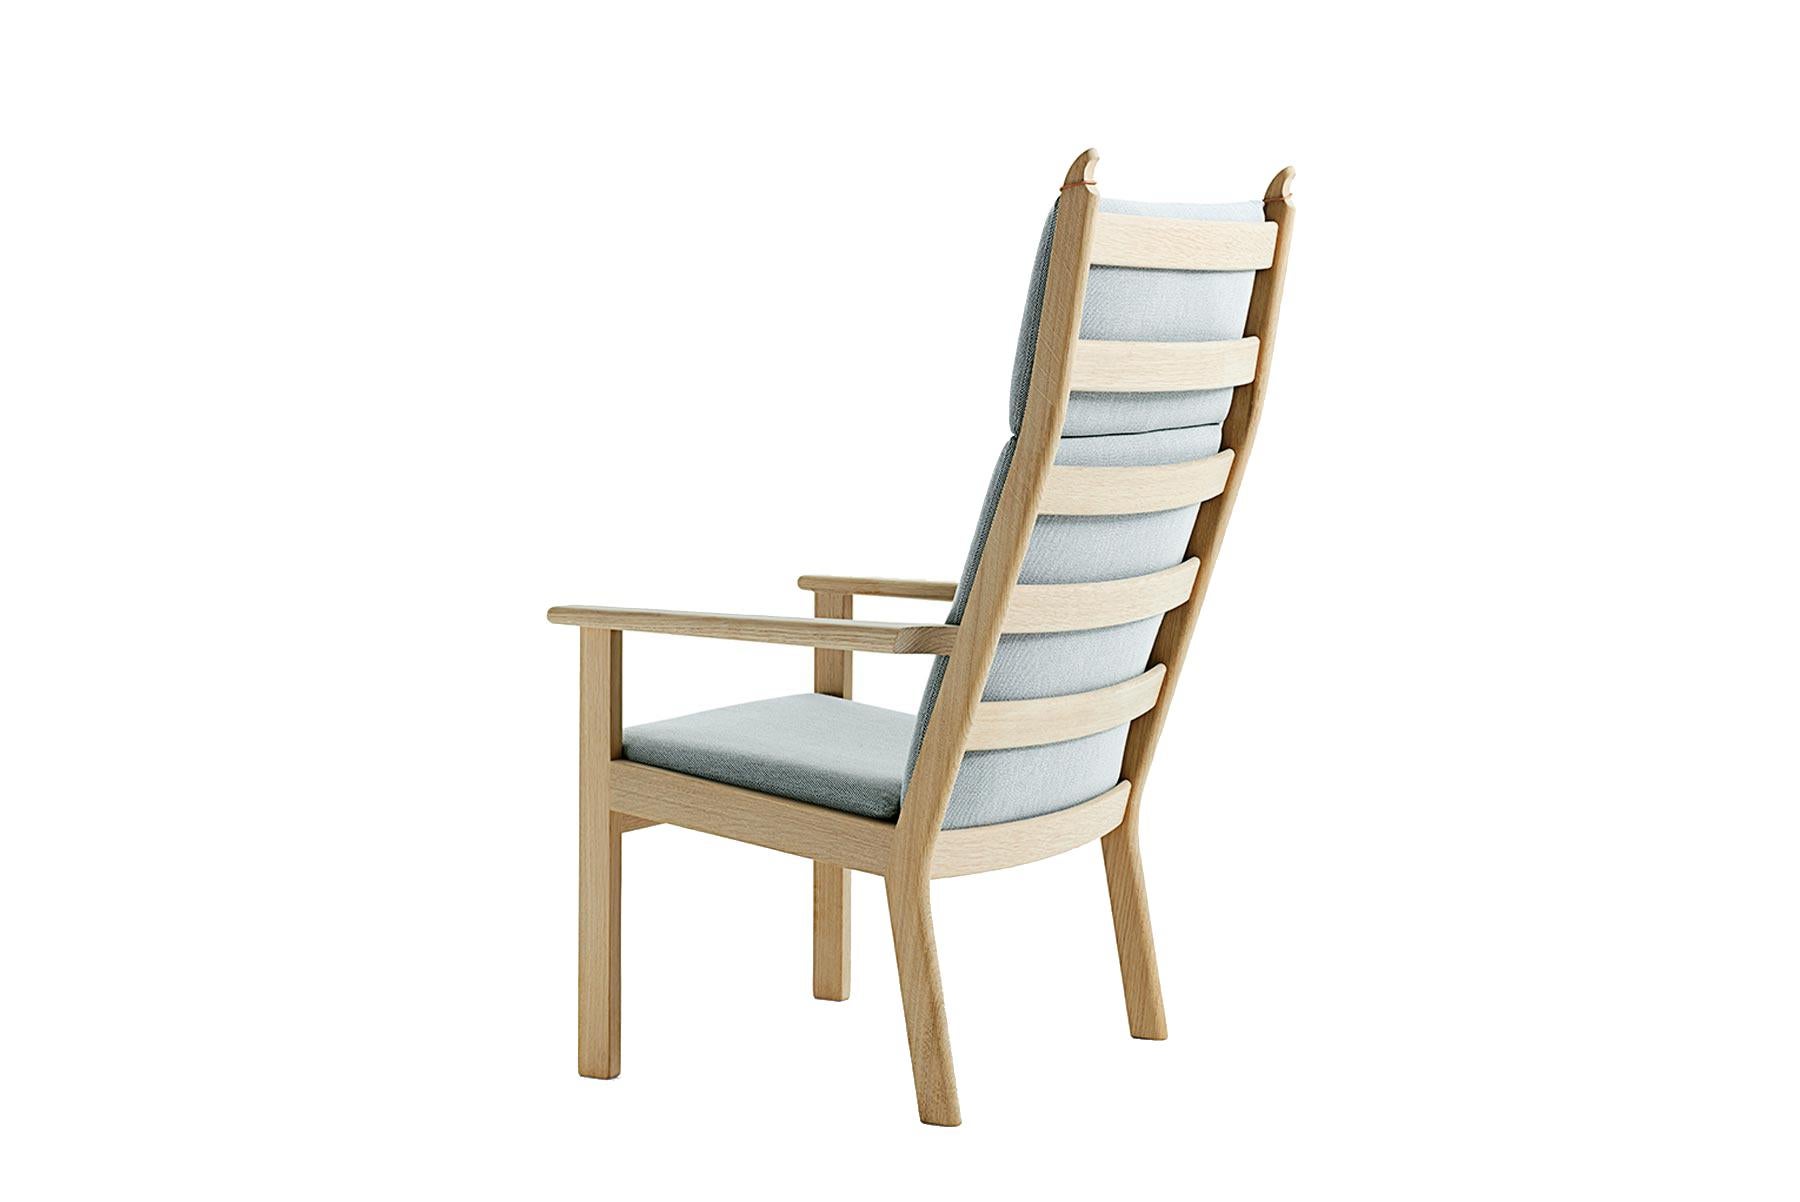 Designed by Hans Wegner, the 284A high back lounge chair provides clean, crisp lines for the modern home. The chair is handcrafted at GETAMA’s factory in Gedsted, Denmark by skilled cabinetmakers using traditional Scandinavian techniques.

 